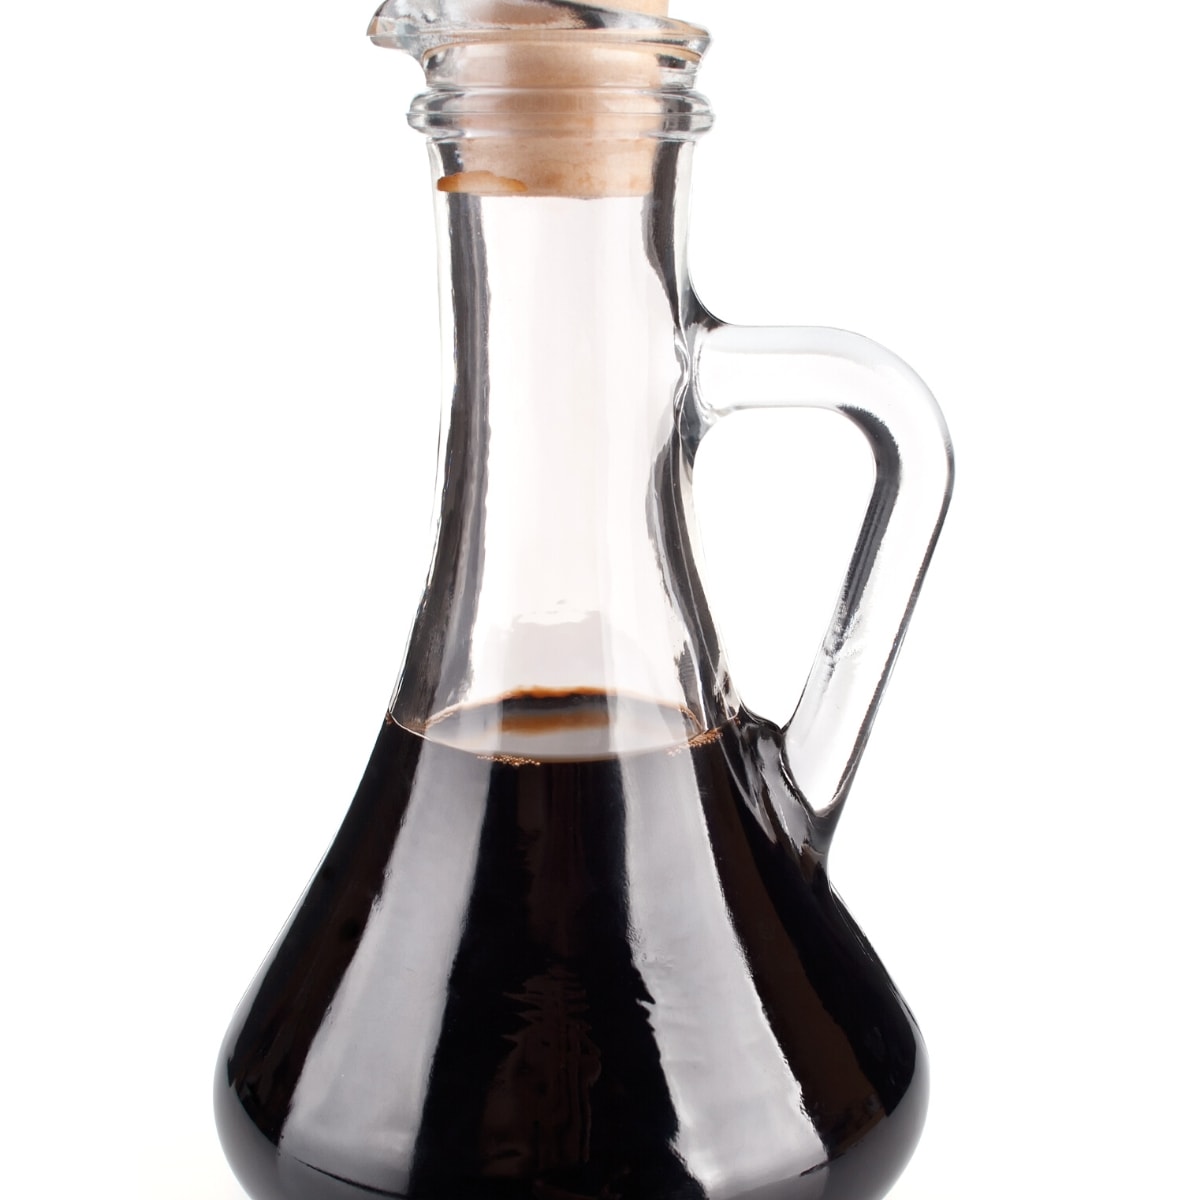 A clear glass corked container filled with dark brown balsamic vinegar.